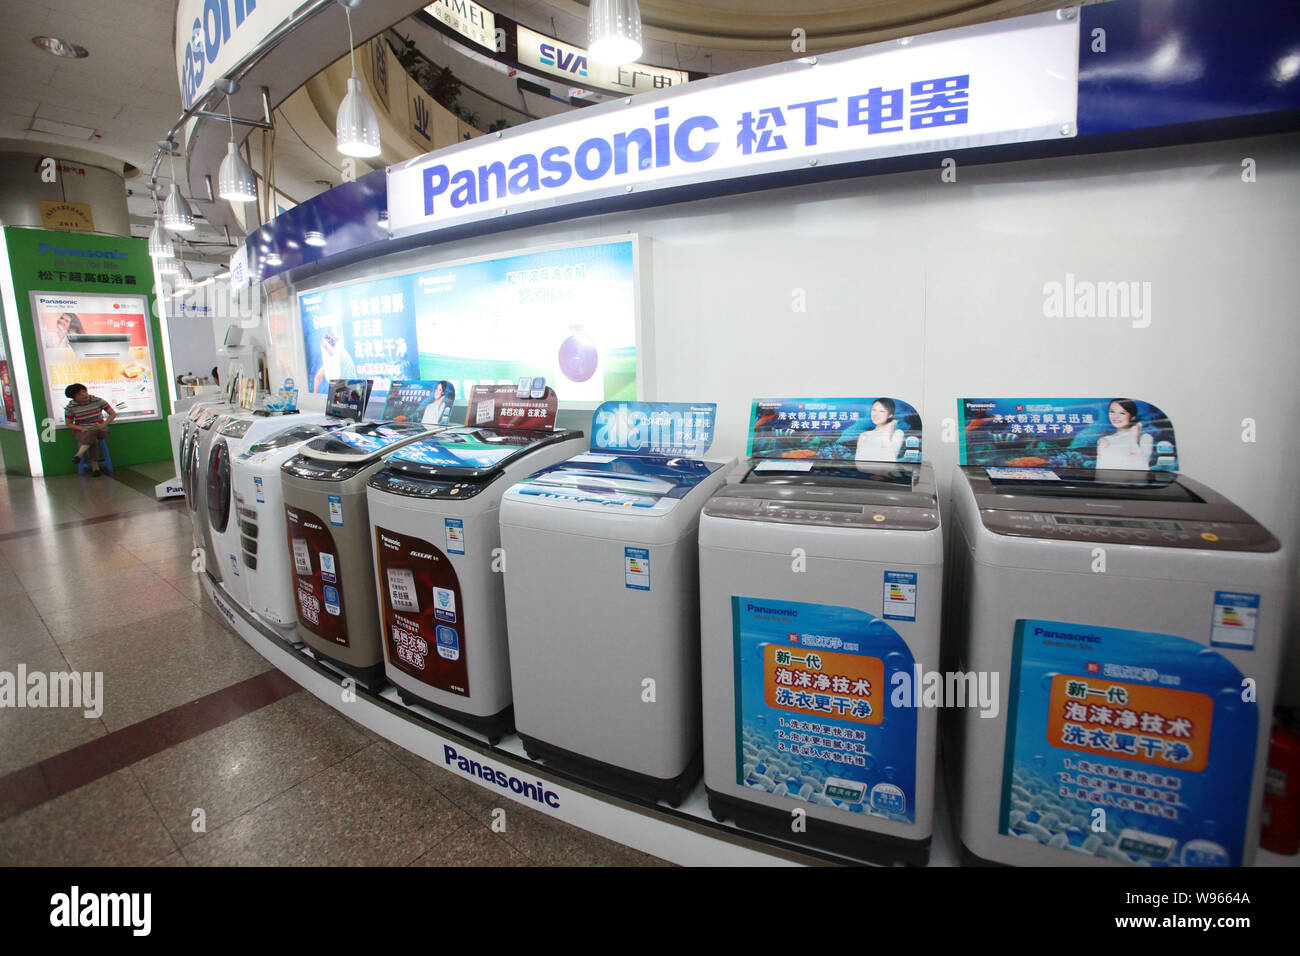 Due to recent territorial disputes between China and Japan, it is deserted with customers at a Panasonic outlet in a mall selling electronic appliance Stock Photo